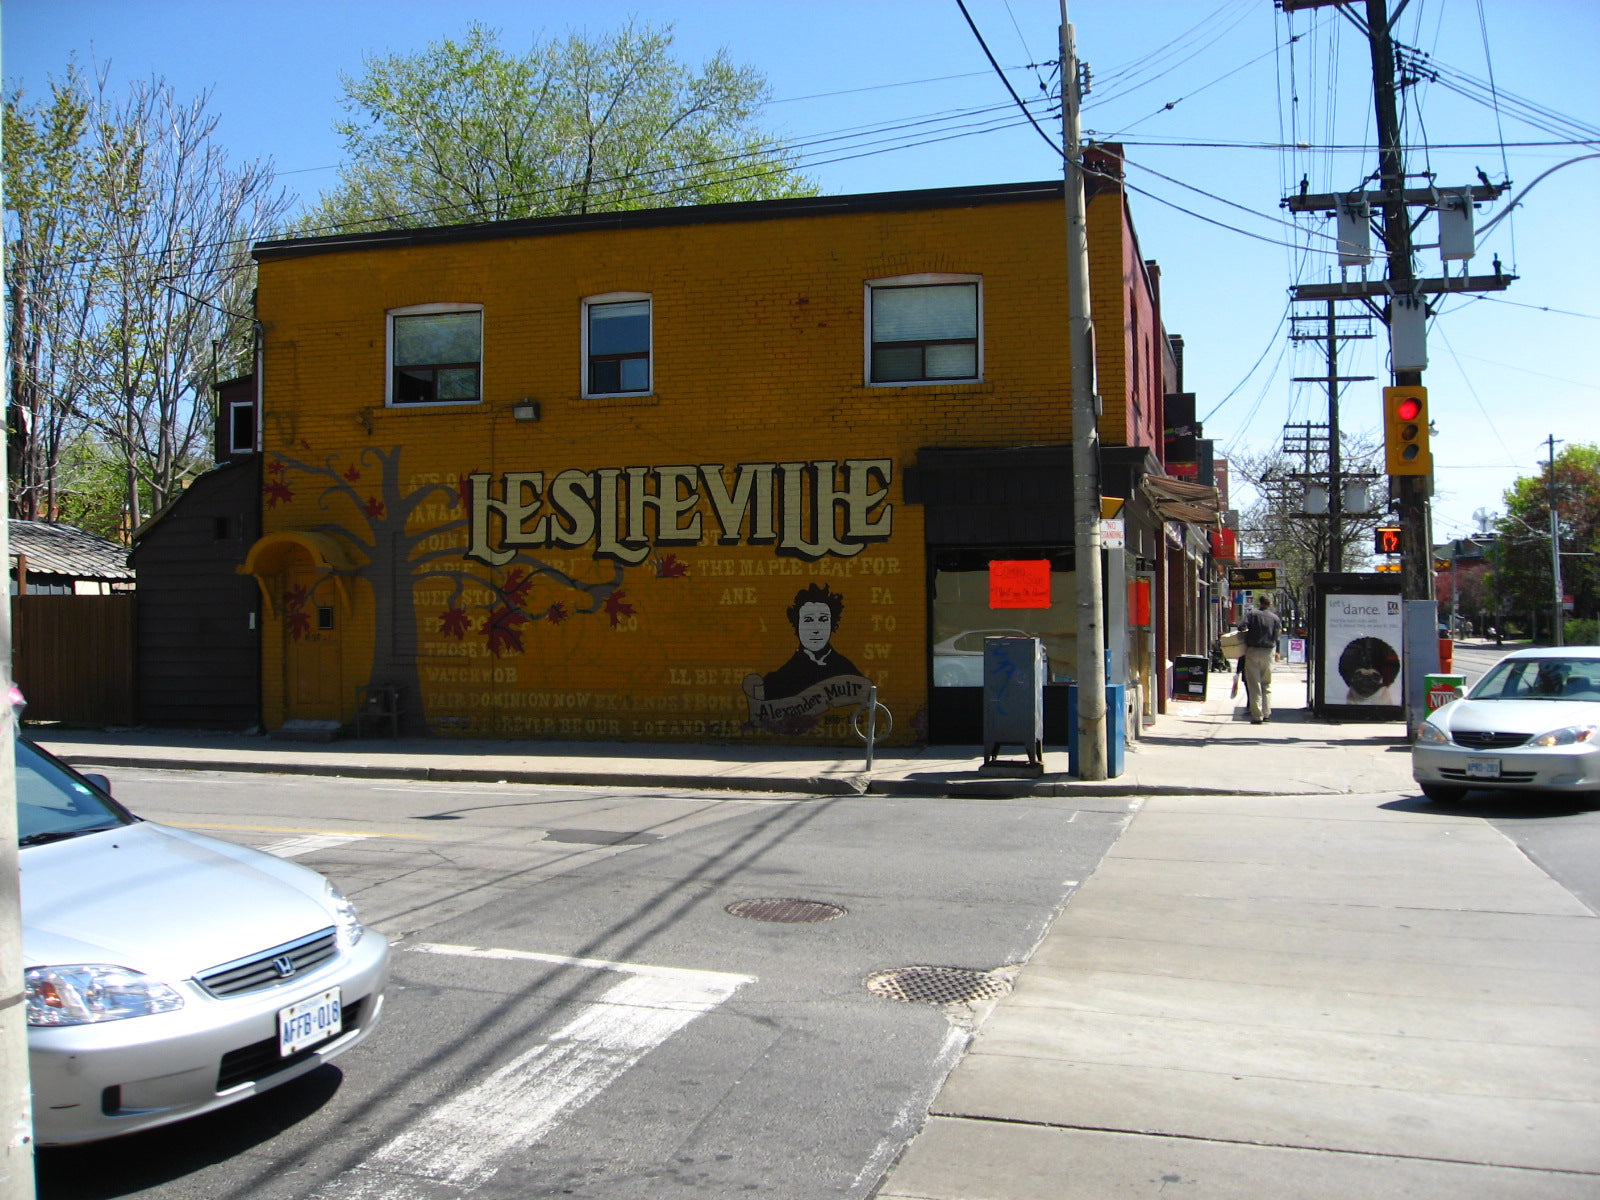 "Welcome to Leslieville" by Linda N. is licensed under CC BY 2.0. Description: Mural with the word "Leslieville" painted on a brick building with cars turning a corner in the foreground.